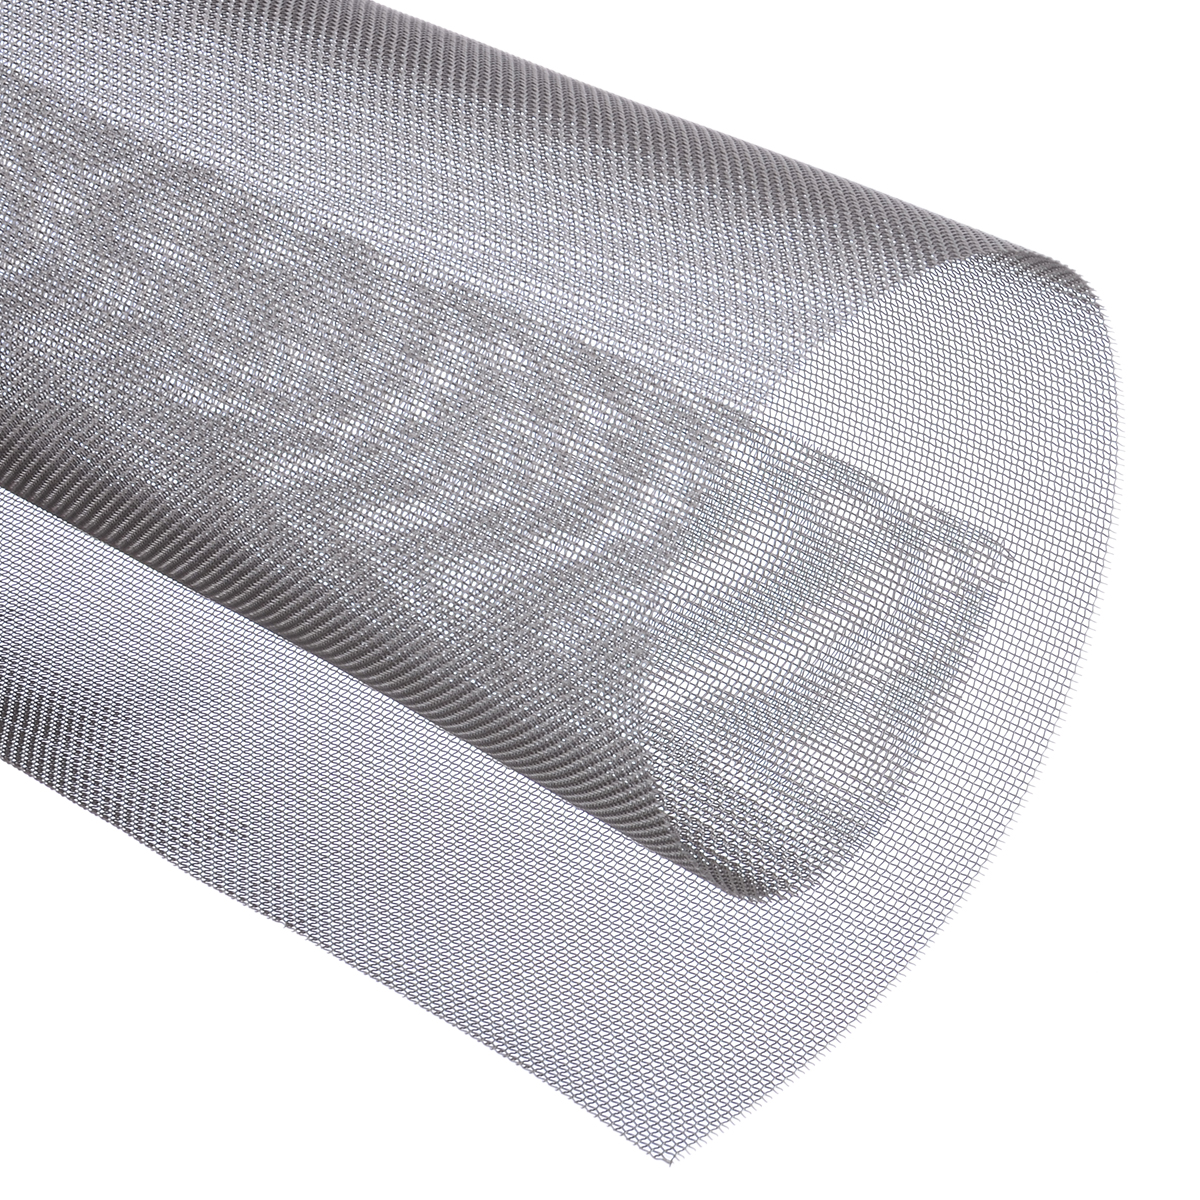 30*30cm Silver 30 Mesh 600 Micron Stainless Steel Filter Filtration Woven Wire Screen For Industrial Tools